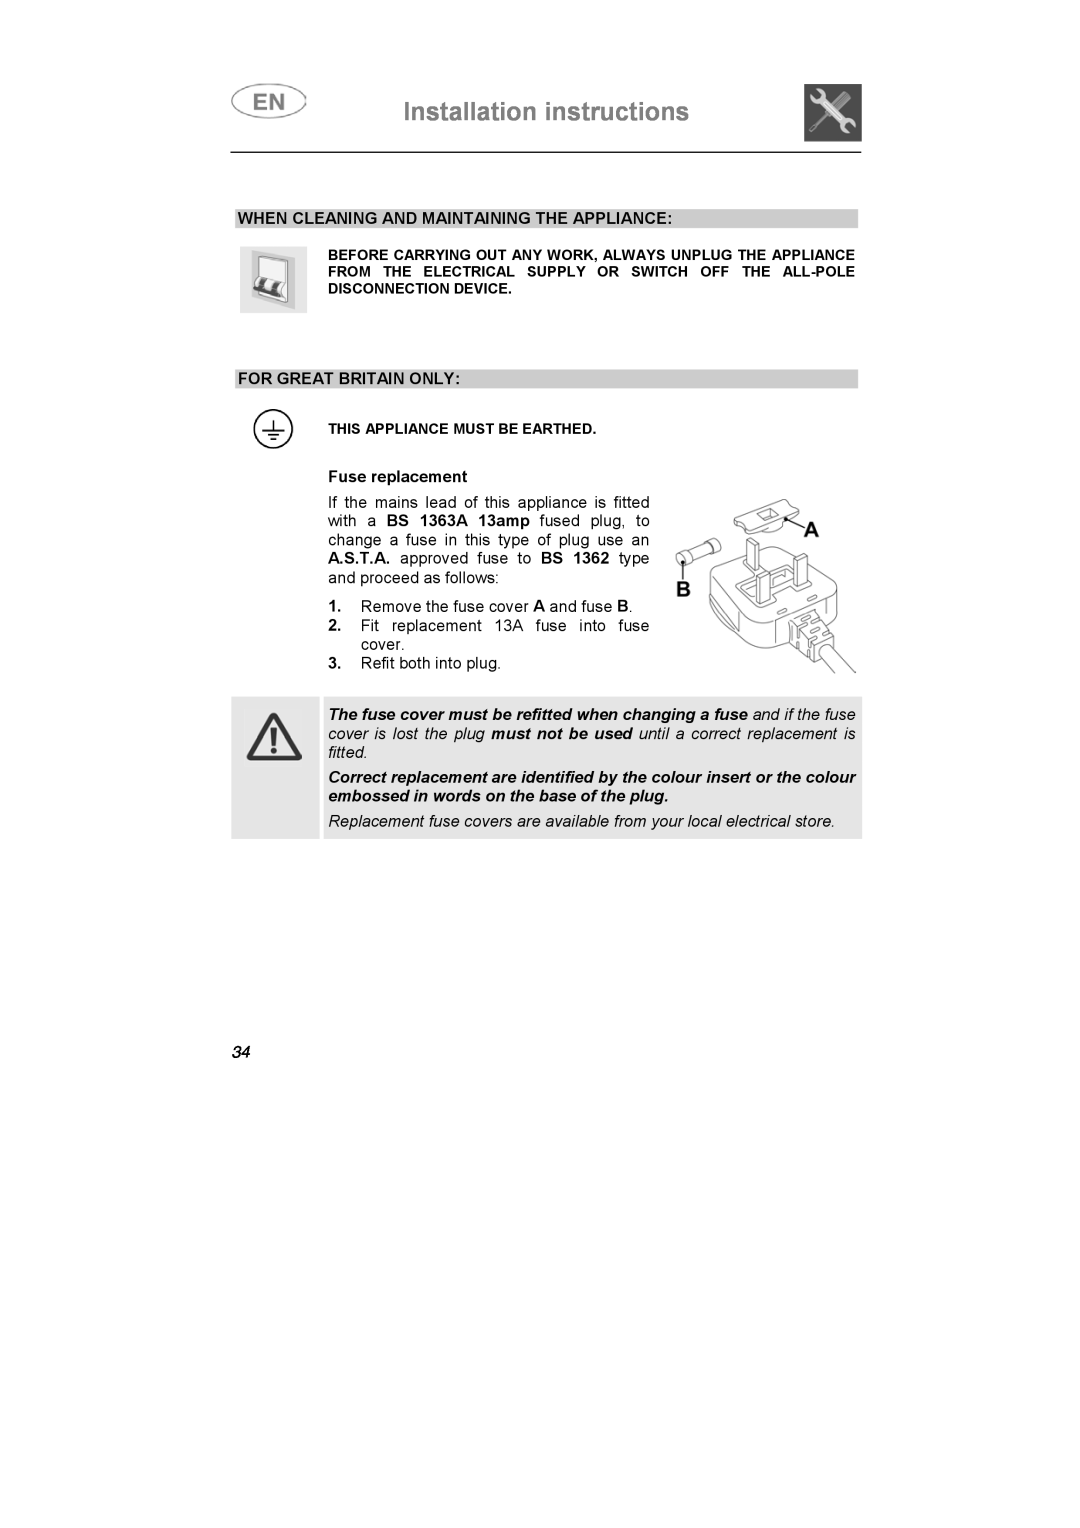 Smeg LS4647XH7 Installation instructions, When Cleaning And Maintaining The Appliance, For Great Britain Only 